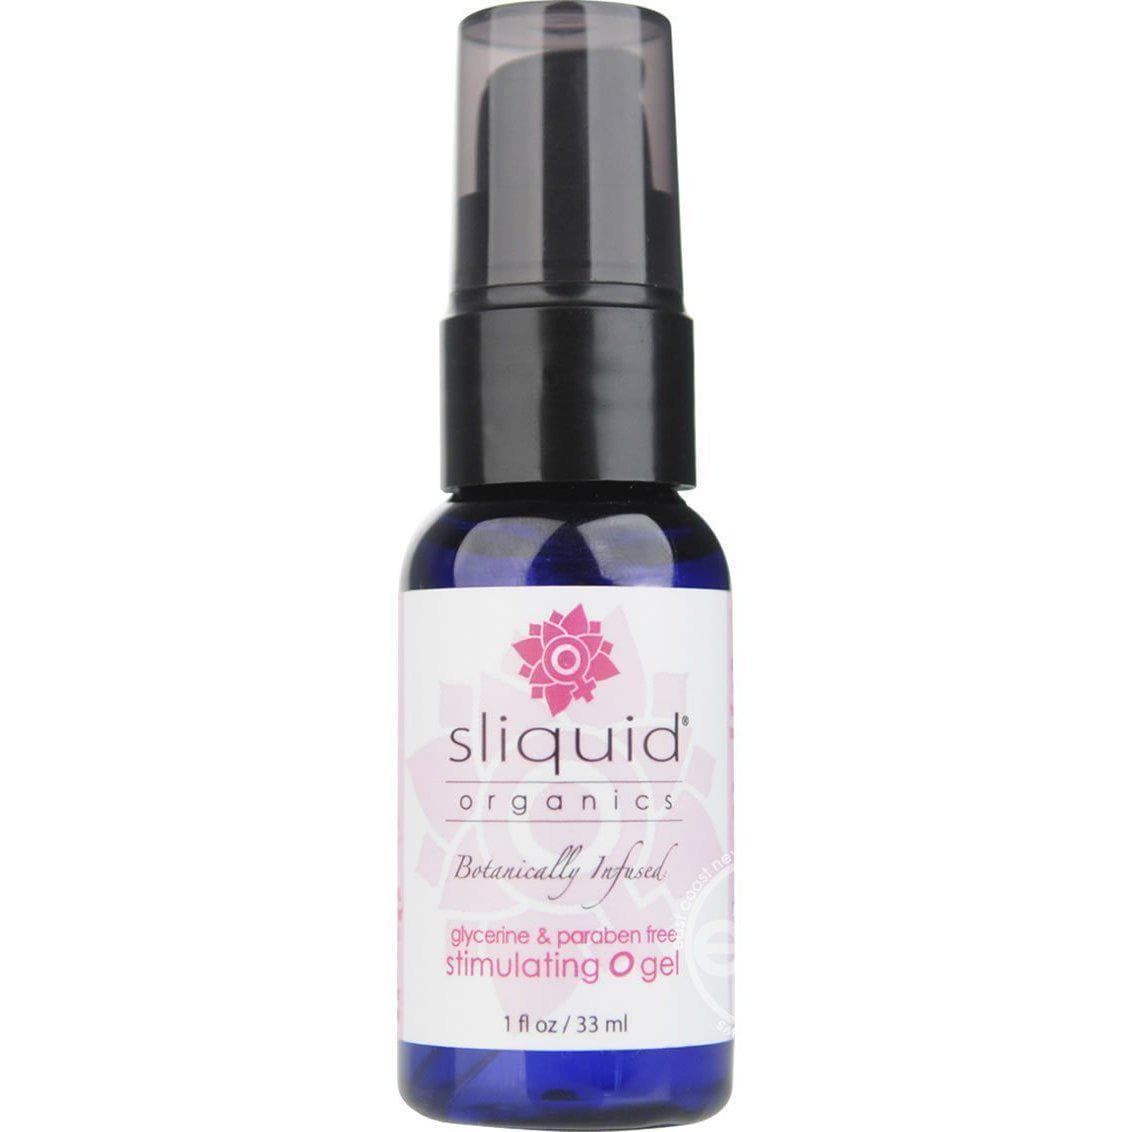 Sliquid Organics Clitoral Stimulating O Gel Water Based 1 Ounce - Romantic Blessings